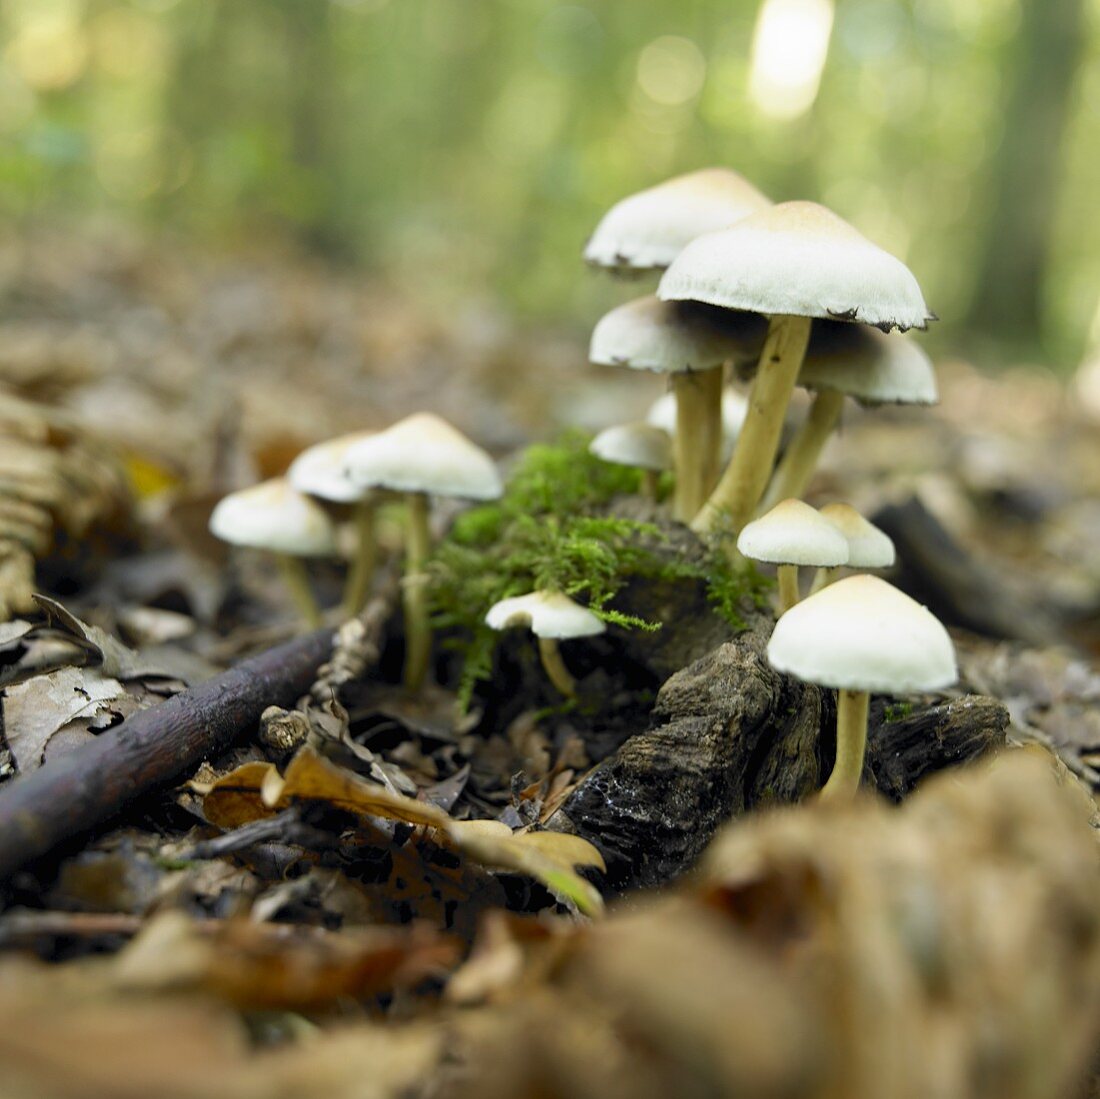 Sulphur tuft (Hypholoma fasciculare) in forest